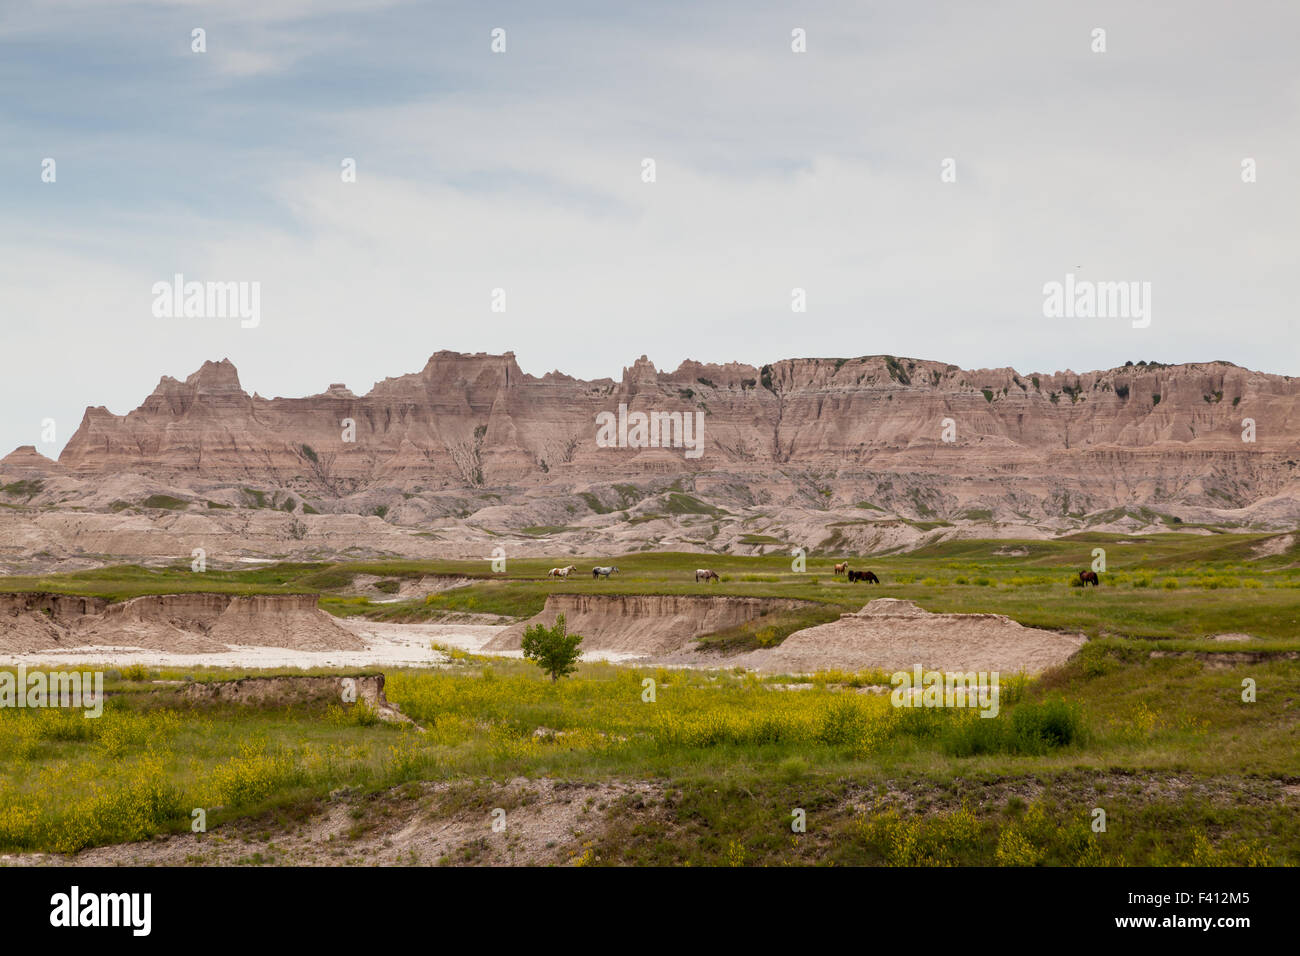 Seven horses in a green field below the dynamically carved mountains of the Badlands in South Dakota. Stock Photo